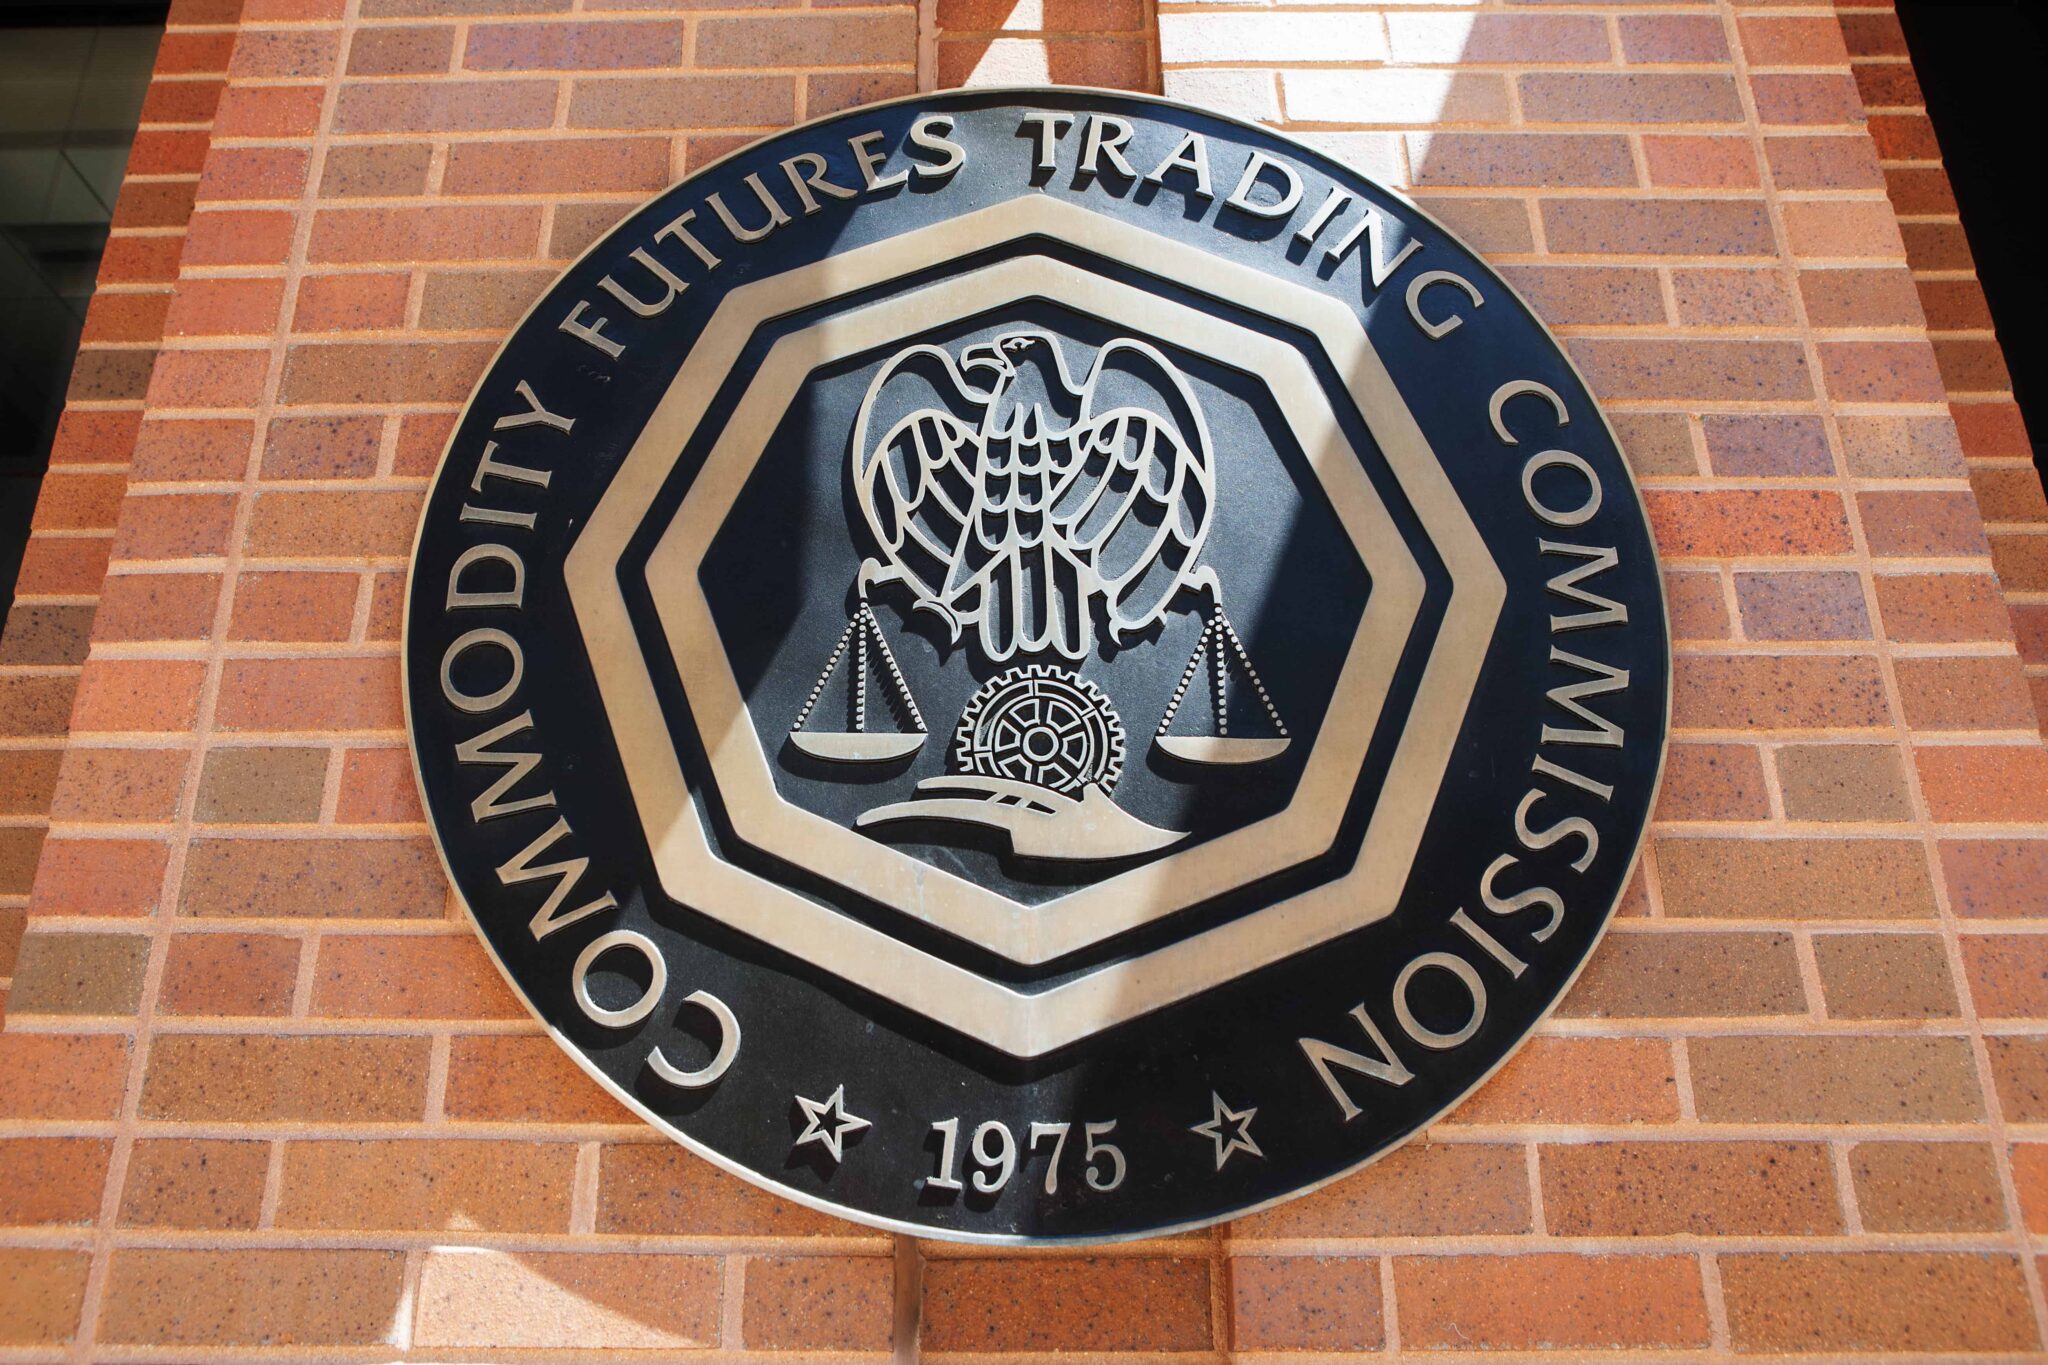 CFTC Sues Gemini for Misleading Information on a Bitcoin Futures Product Filing